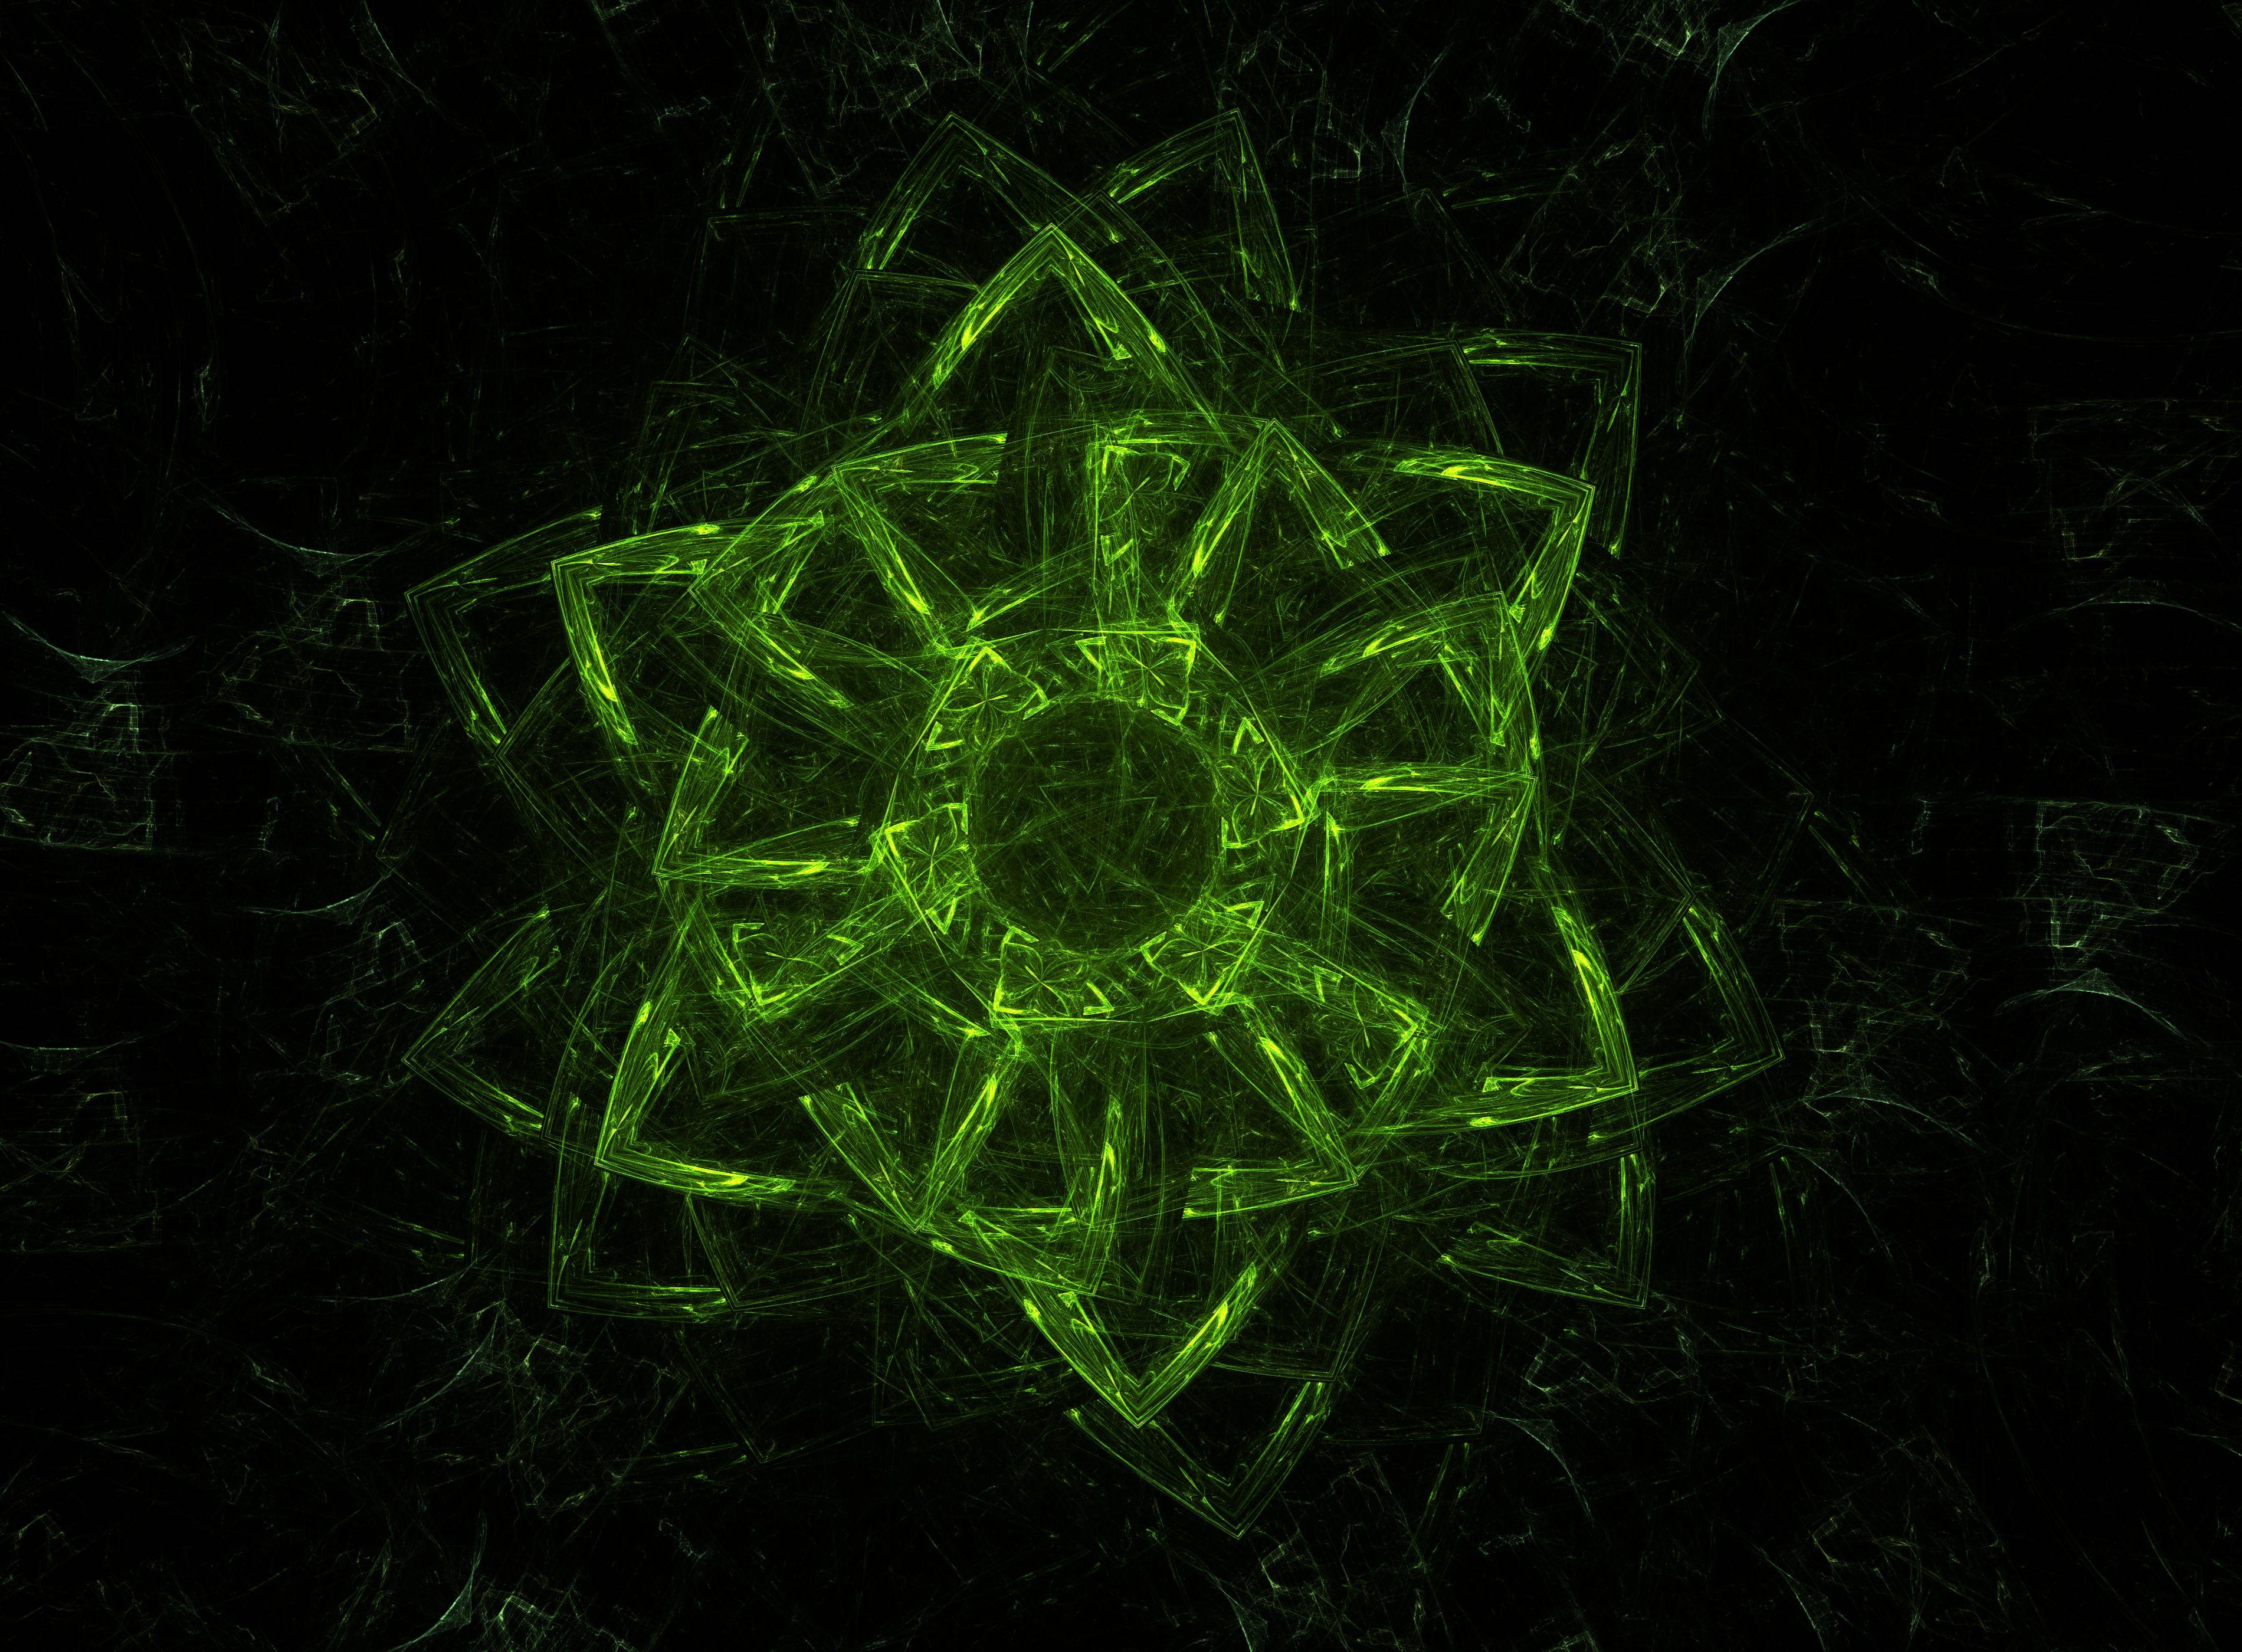 Green stars shine creative picture 1080x1920 iPhone 8766S Plus  wallpaper background picture image